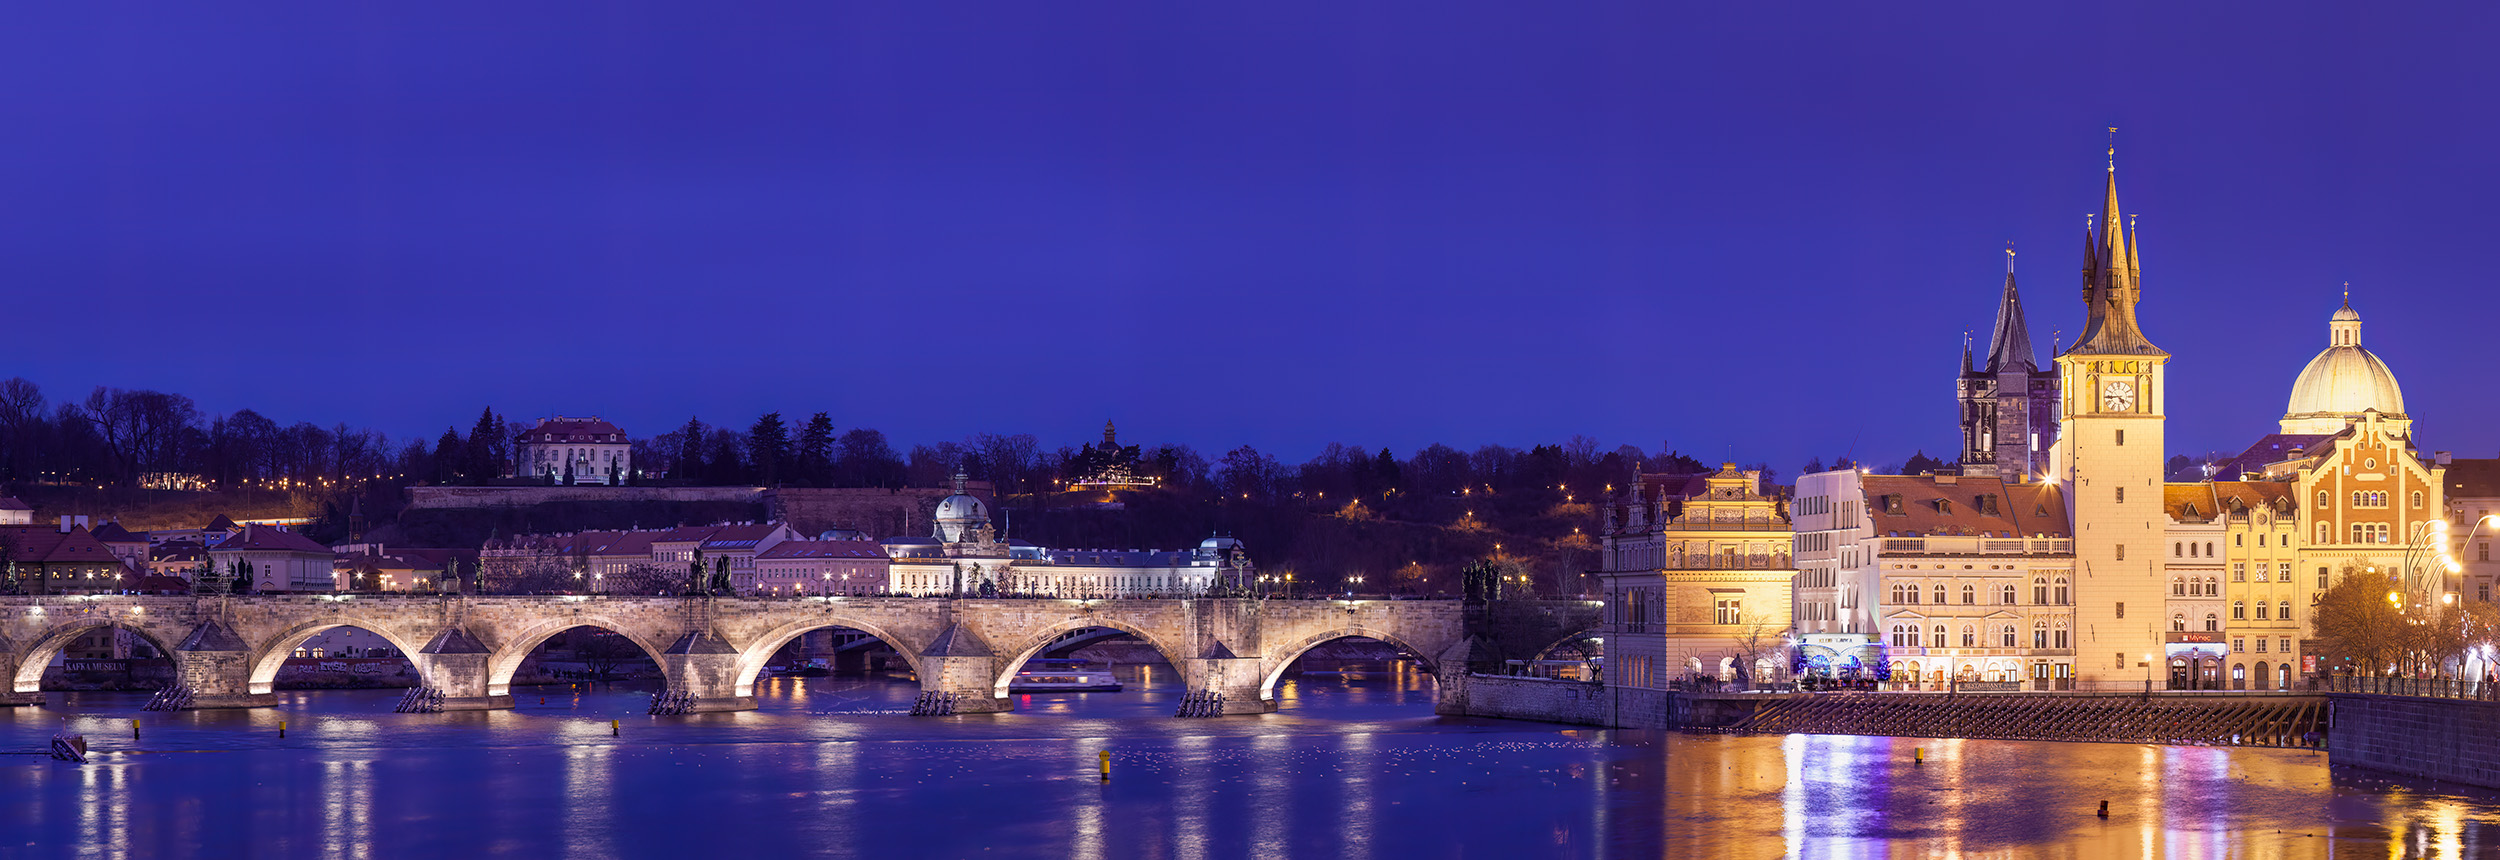 From a vantage point across the Vltava River, I captured the timeless allure of the Charles Bridge during the tranquil hues of...